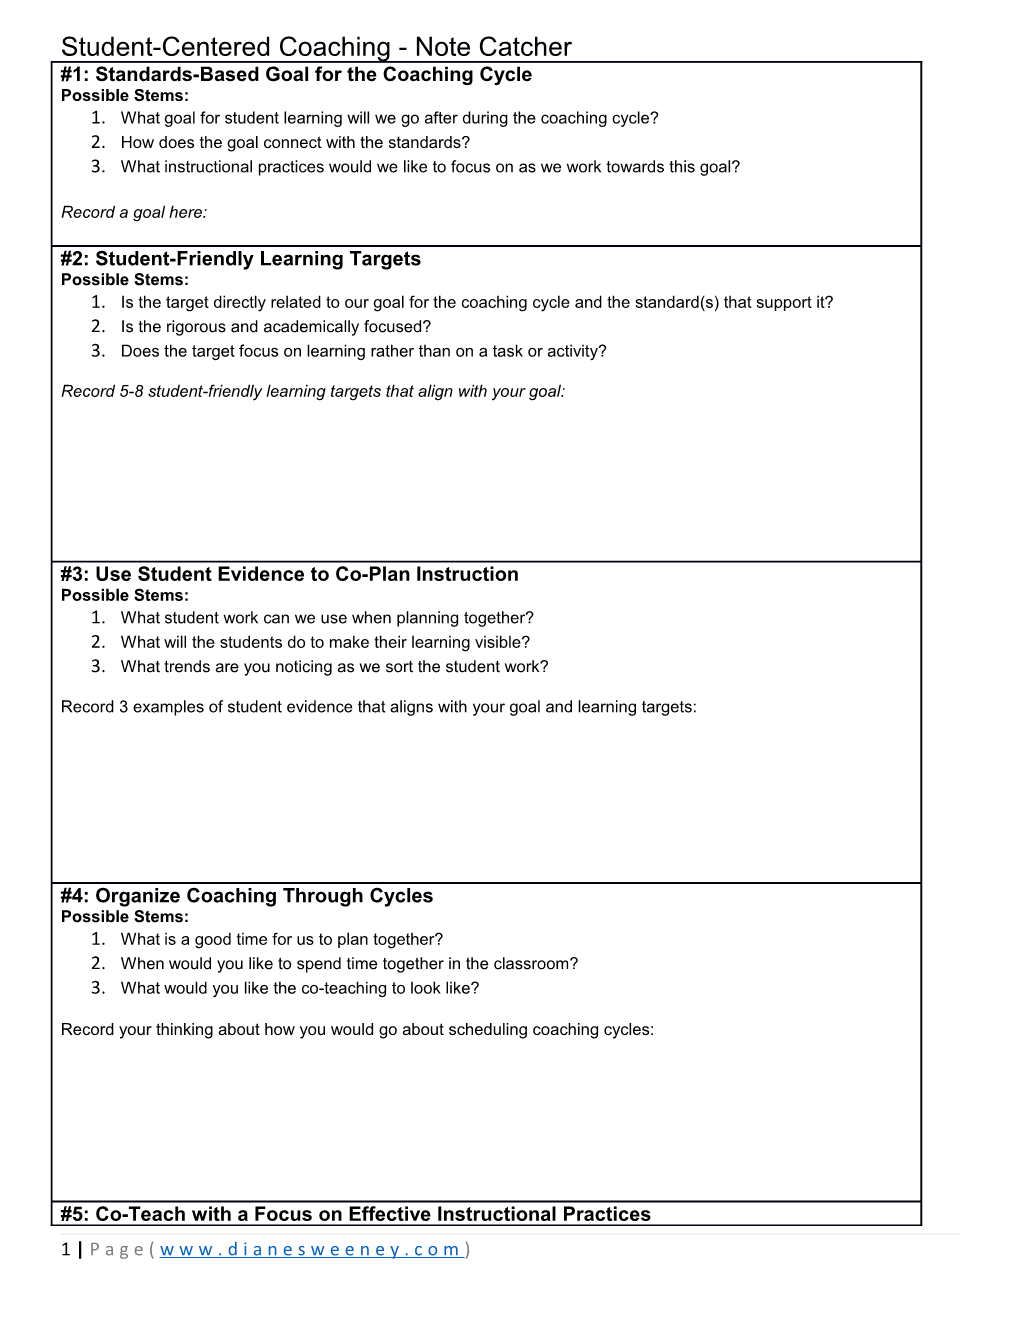 Student-Centered Coaching - Note Catcher